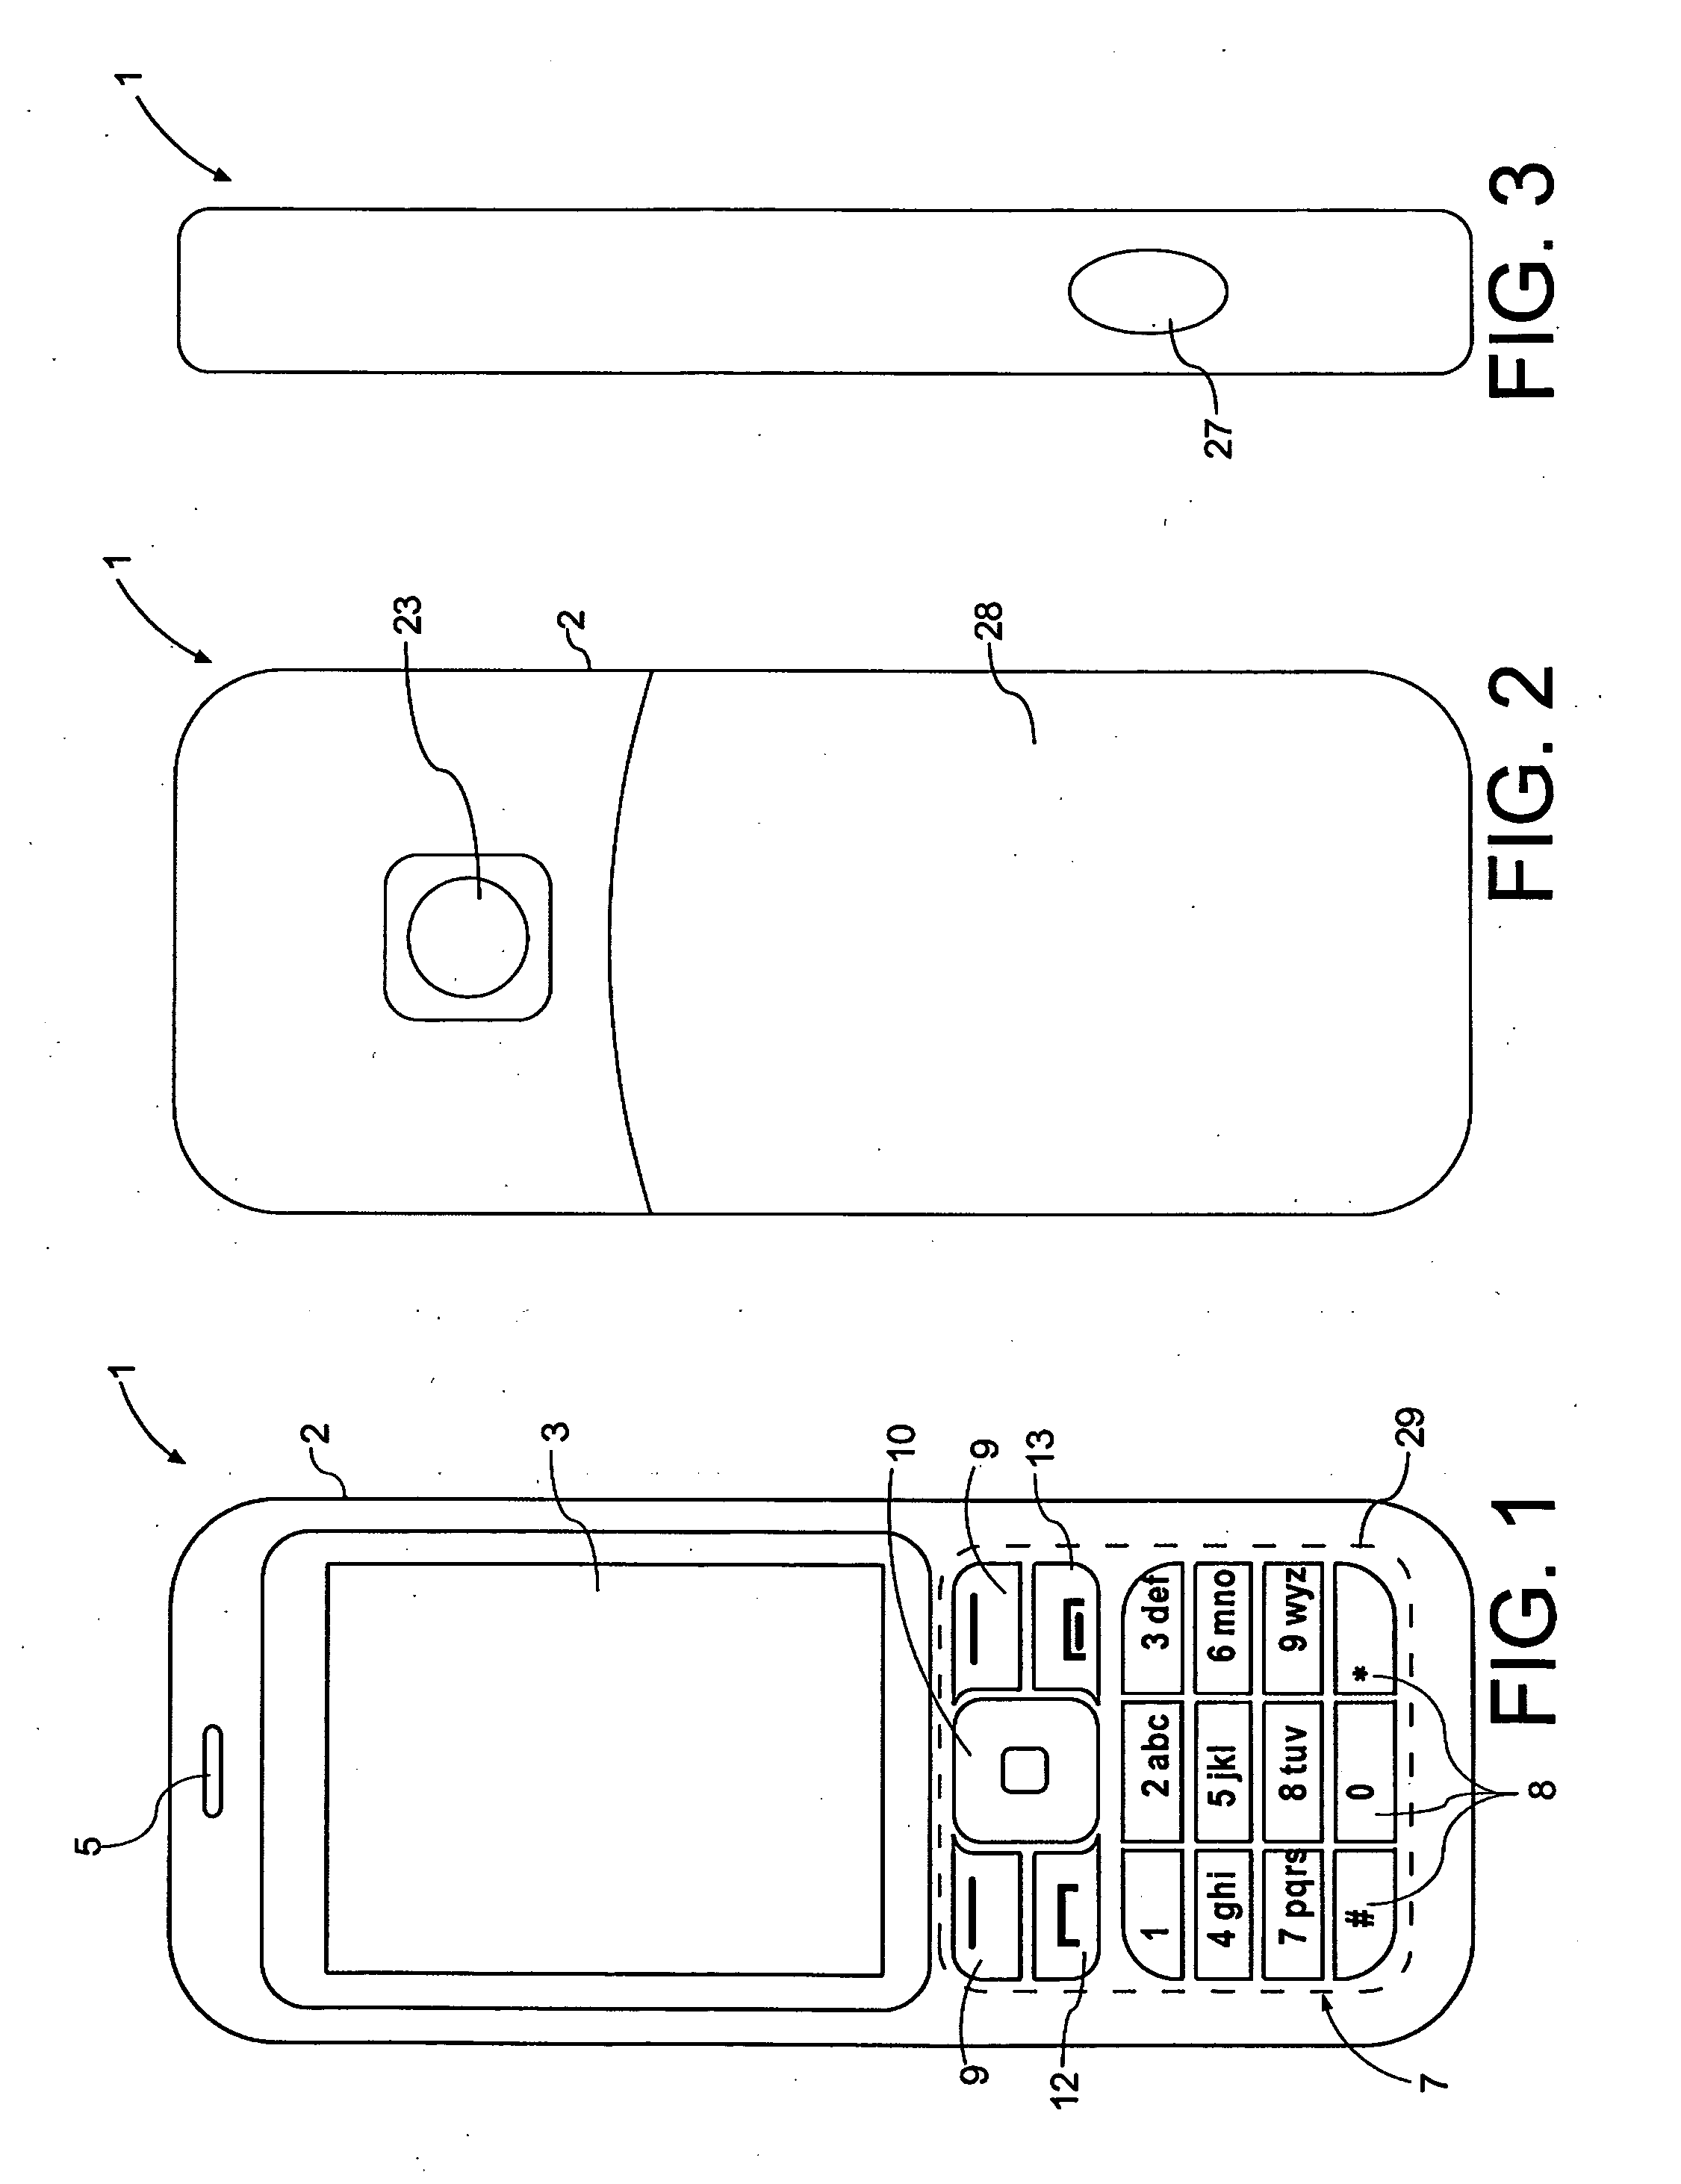 Shutter key for mobile electronic device with image sensor